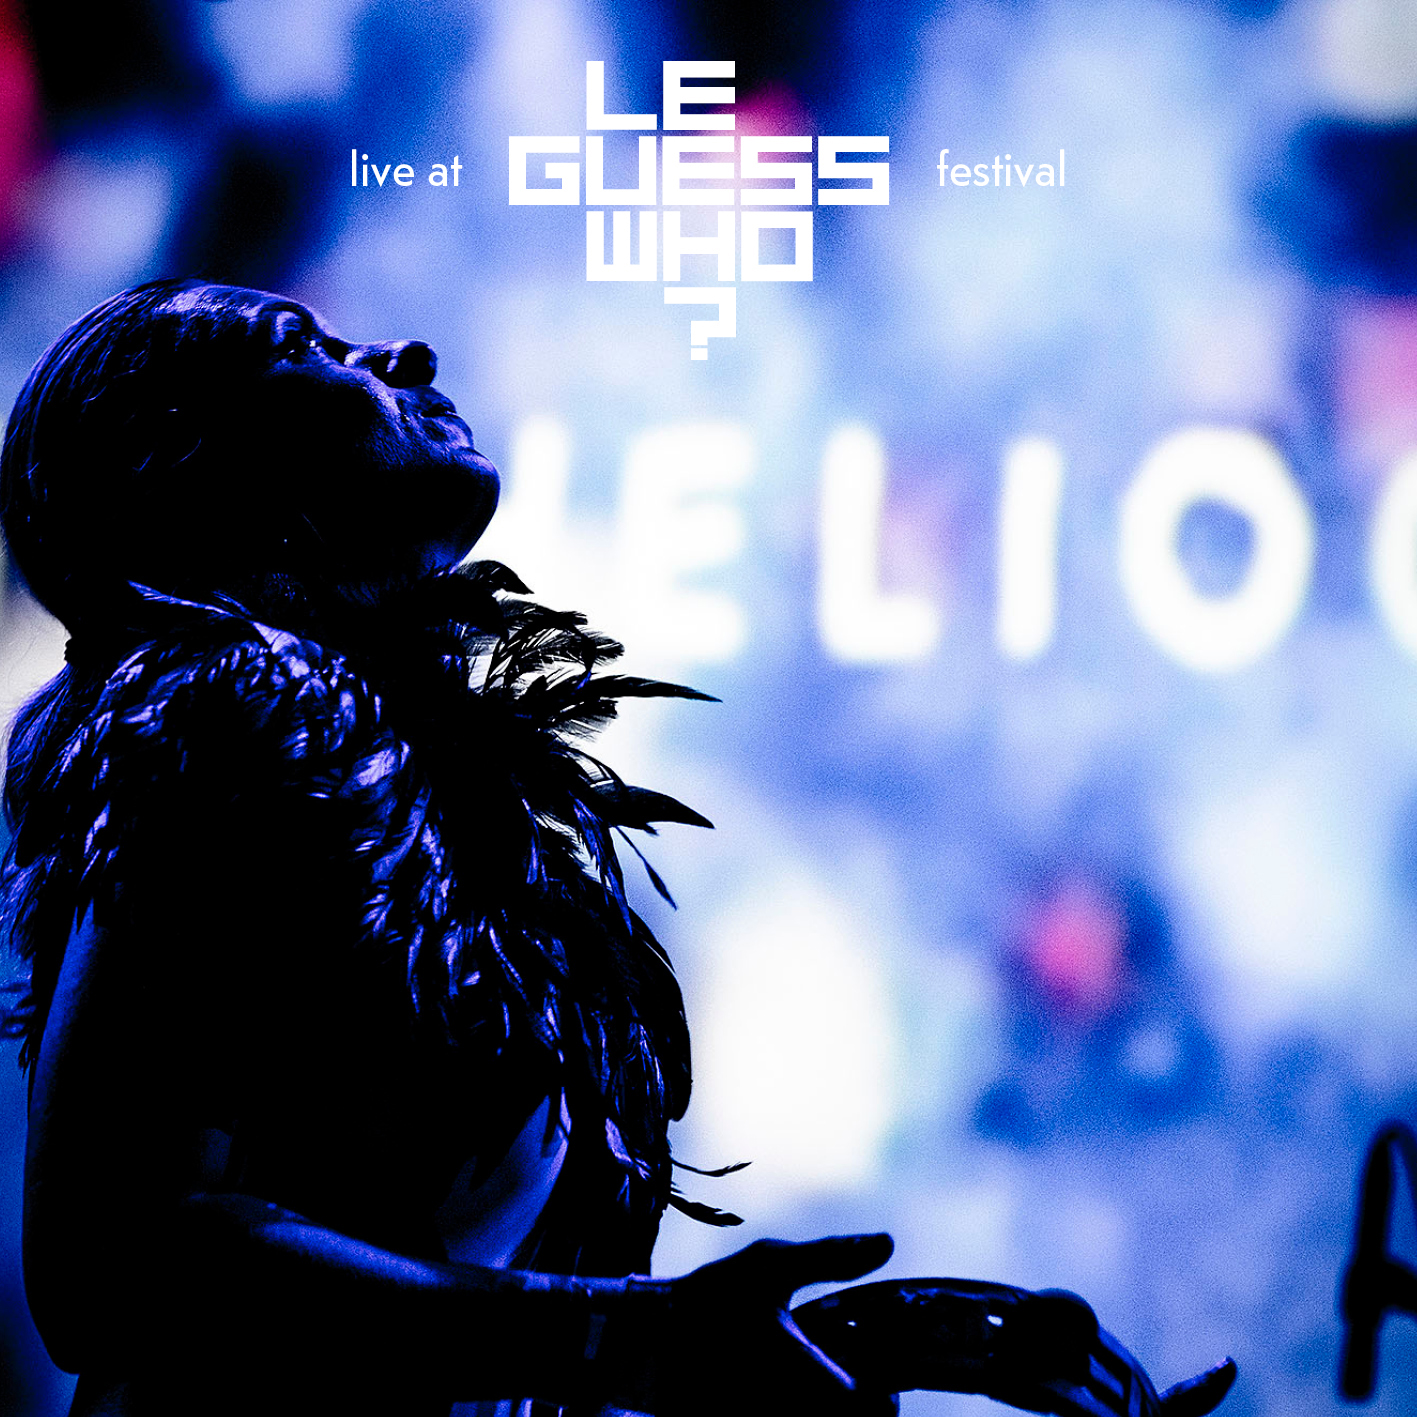 Stream: eclectic London-based collective The Heliocentrics live at Le Guess Who? 2018